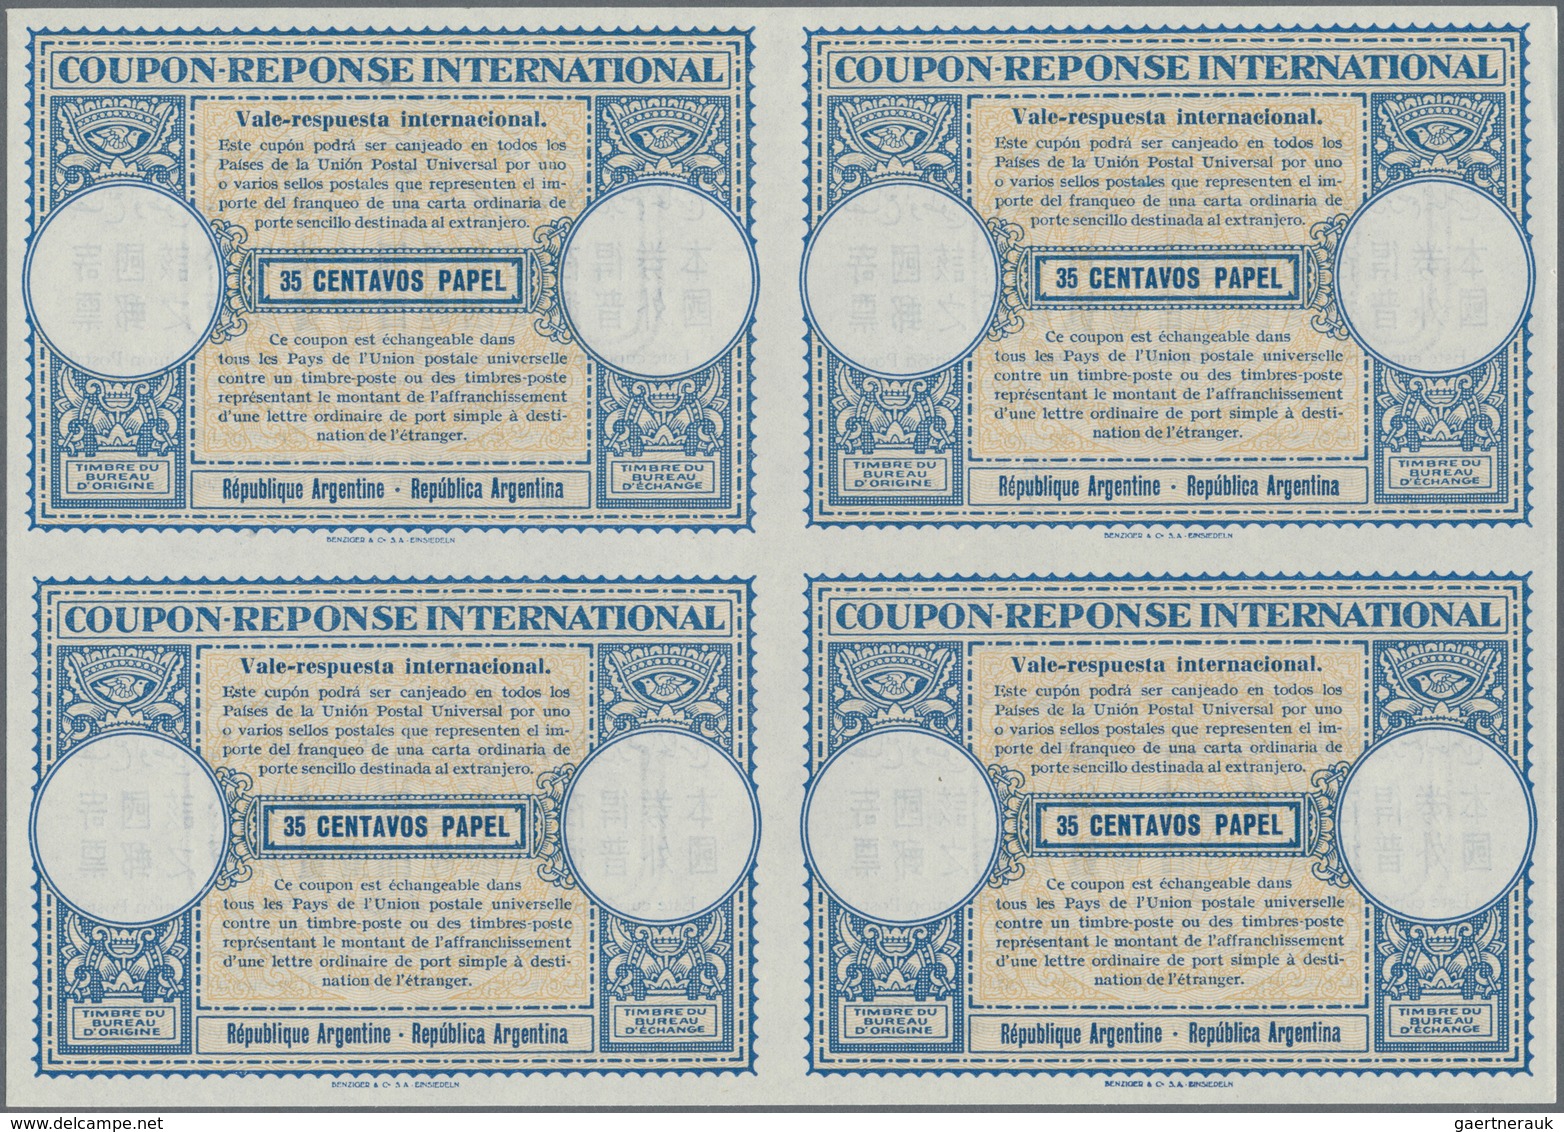 00564 Argentinien - Ganzsachen: 1948/1952. Lot Of 2 Different Intl. Reply Coupons (London Design) Each In - Postal Stationery